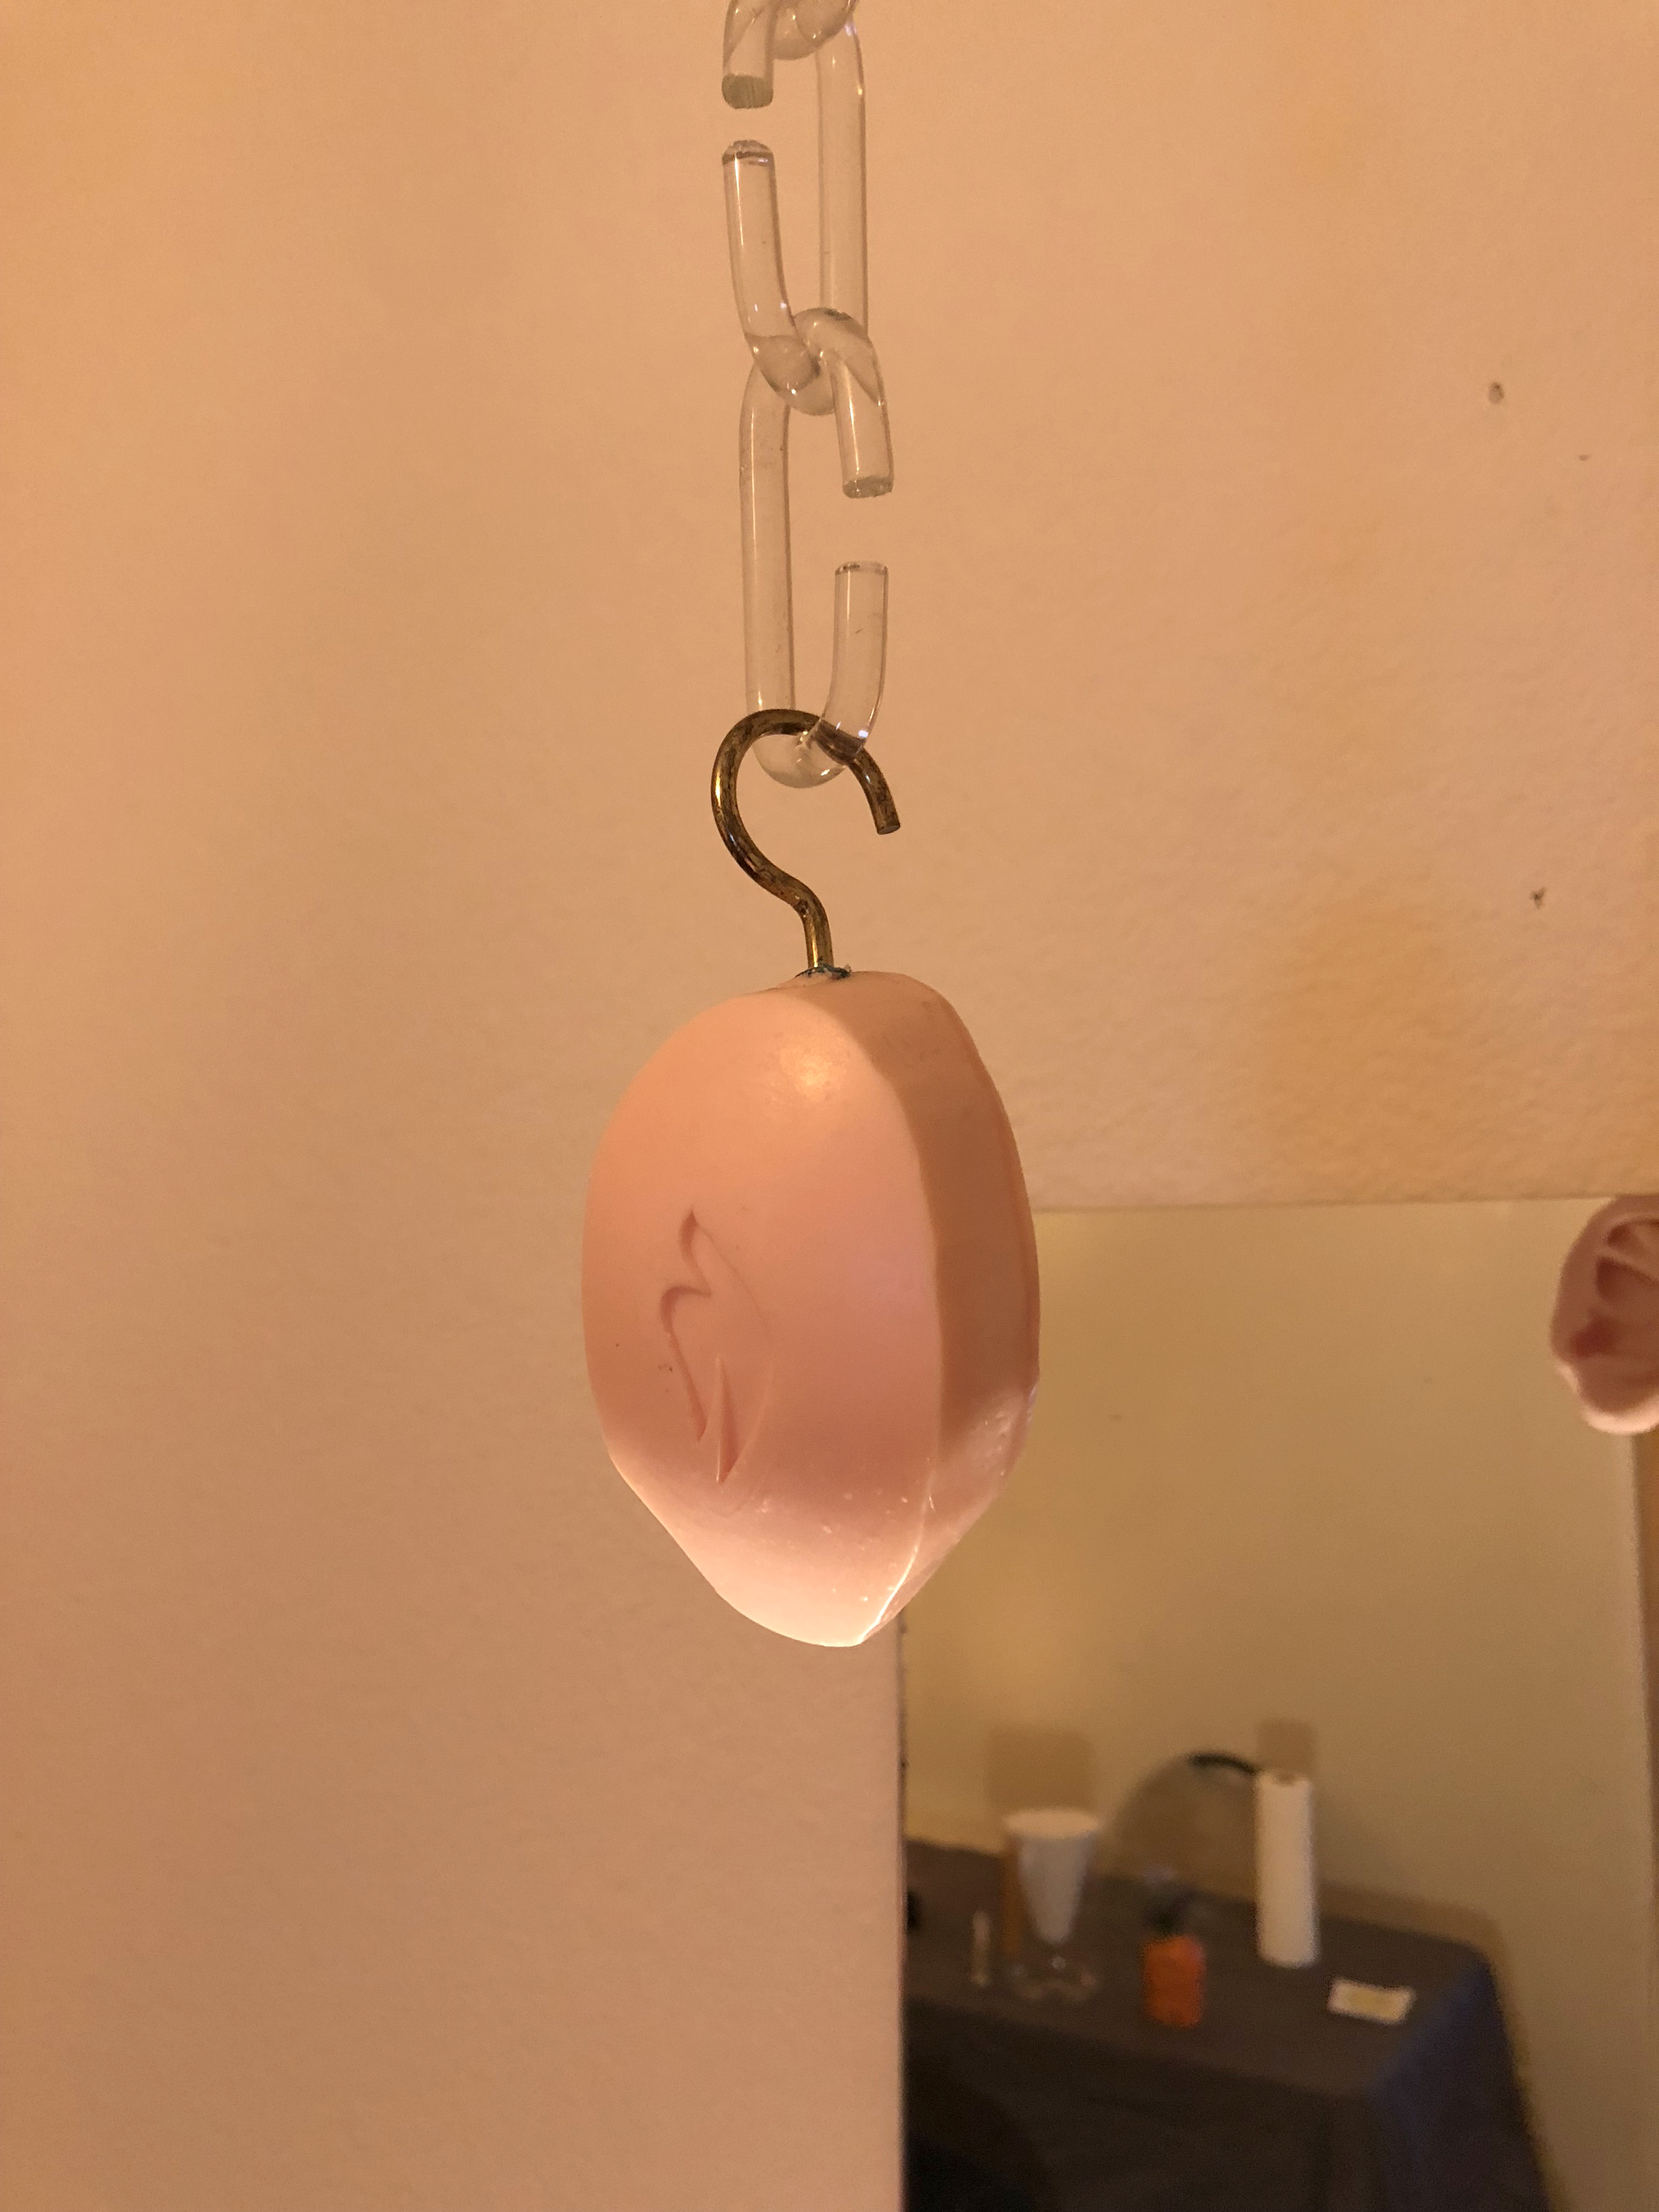 A dove soap bar hung from the ceiling by plastic chains